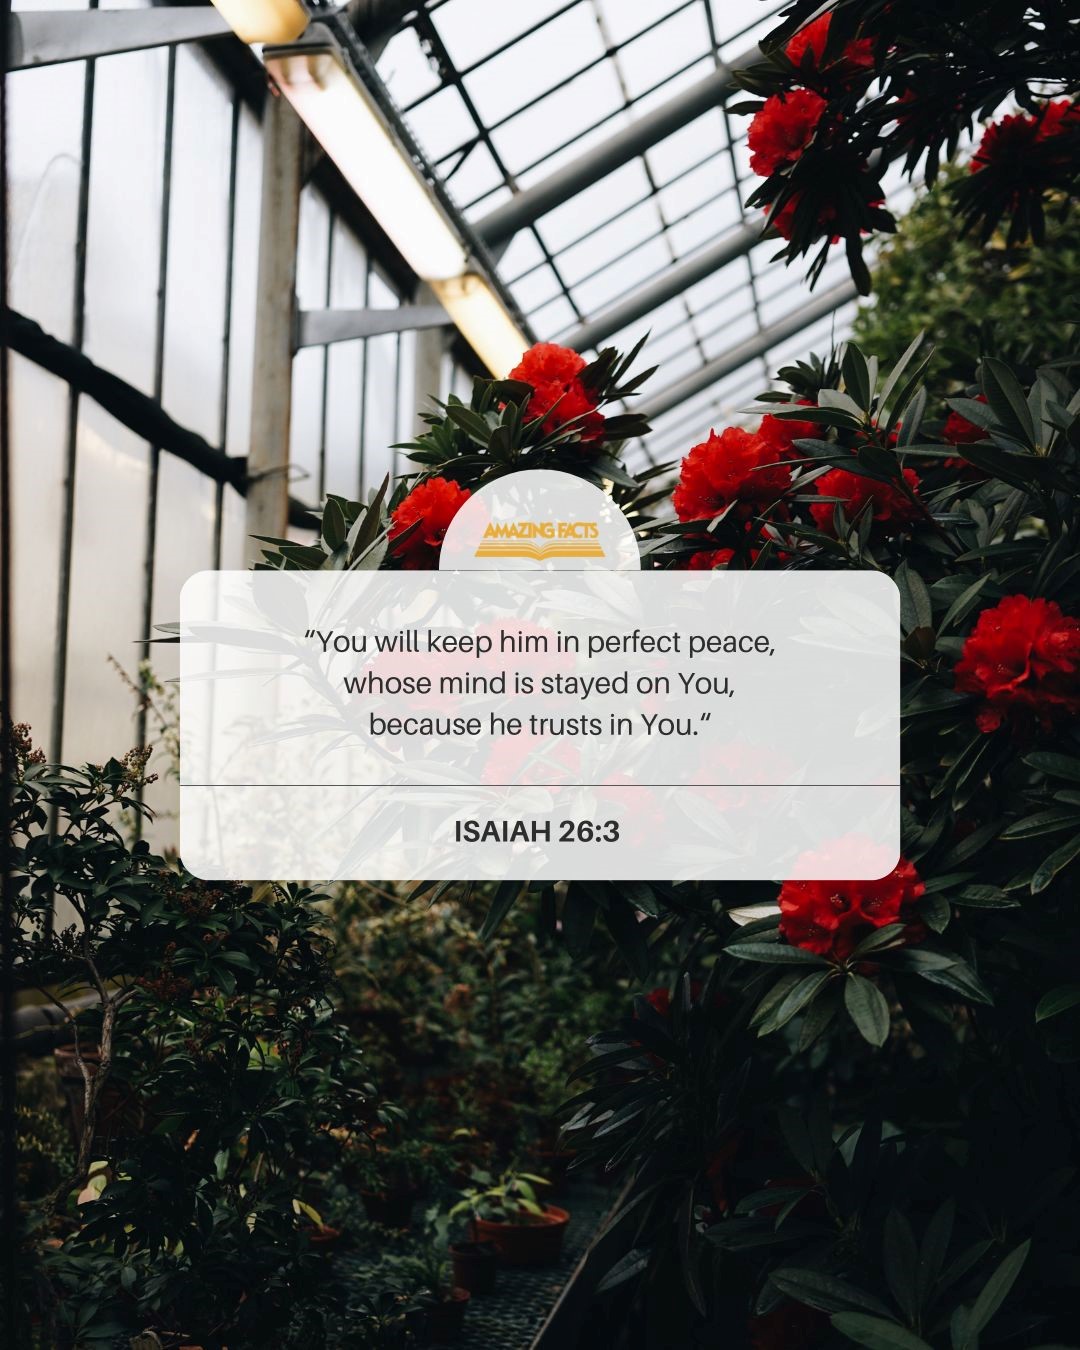 MogecTS "You will keep him in perfect peace, whose mind is stayed on You; because he trusts in You:" ISAIAH 26.3